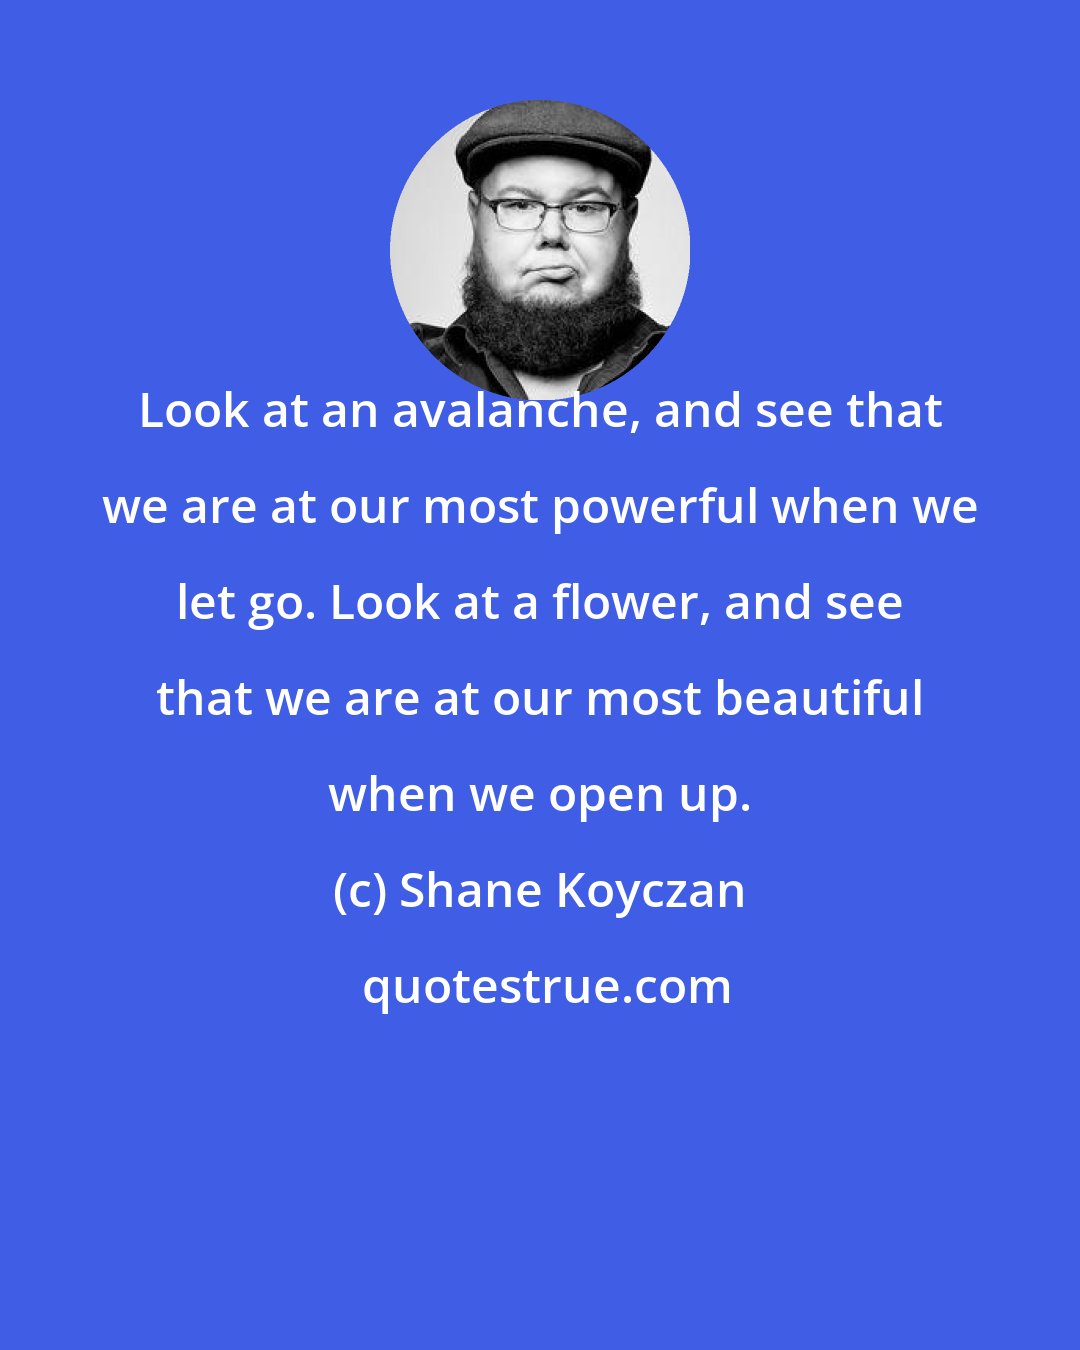 Shane Koyczan: Look at an avalanche, and see that we are at our most powerful when we let go. Look at a flower, and see that we are at our most beautiful when we open up.